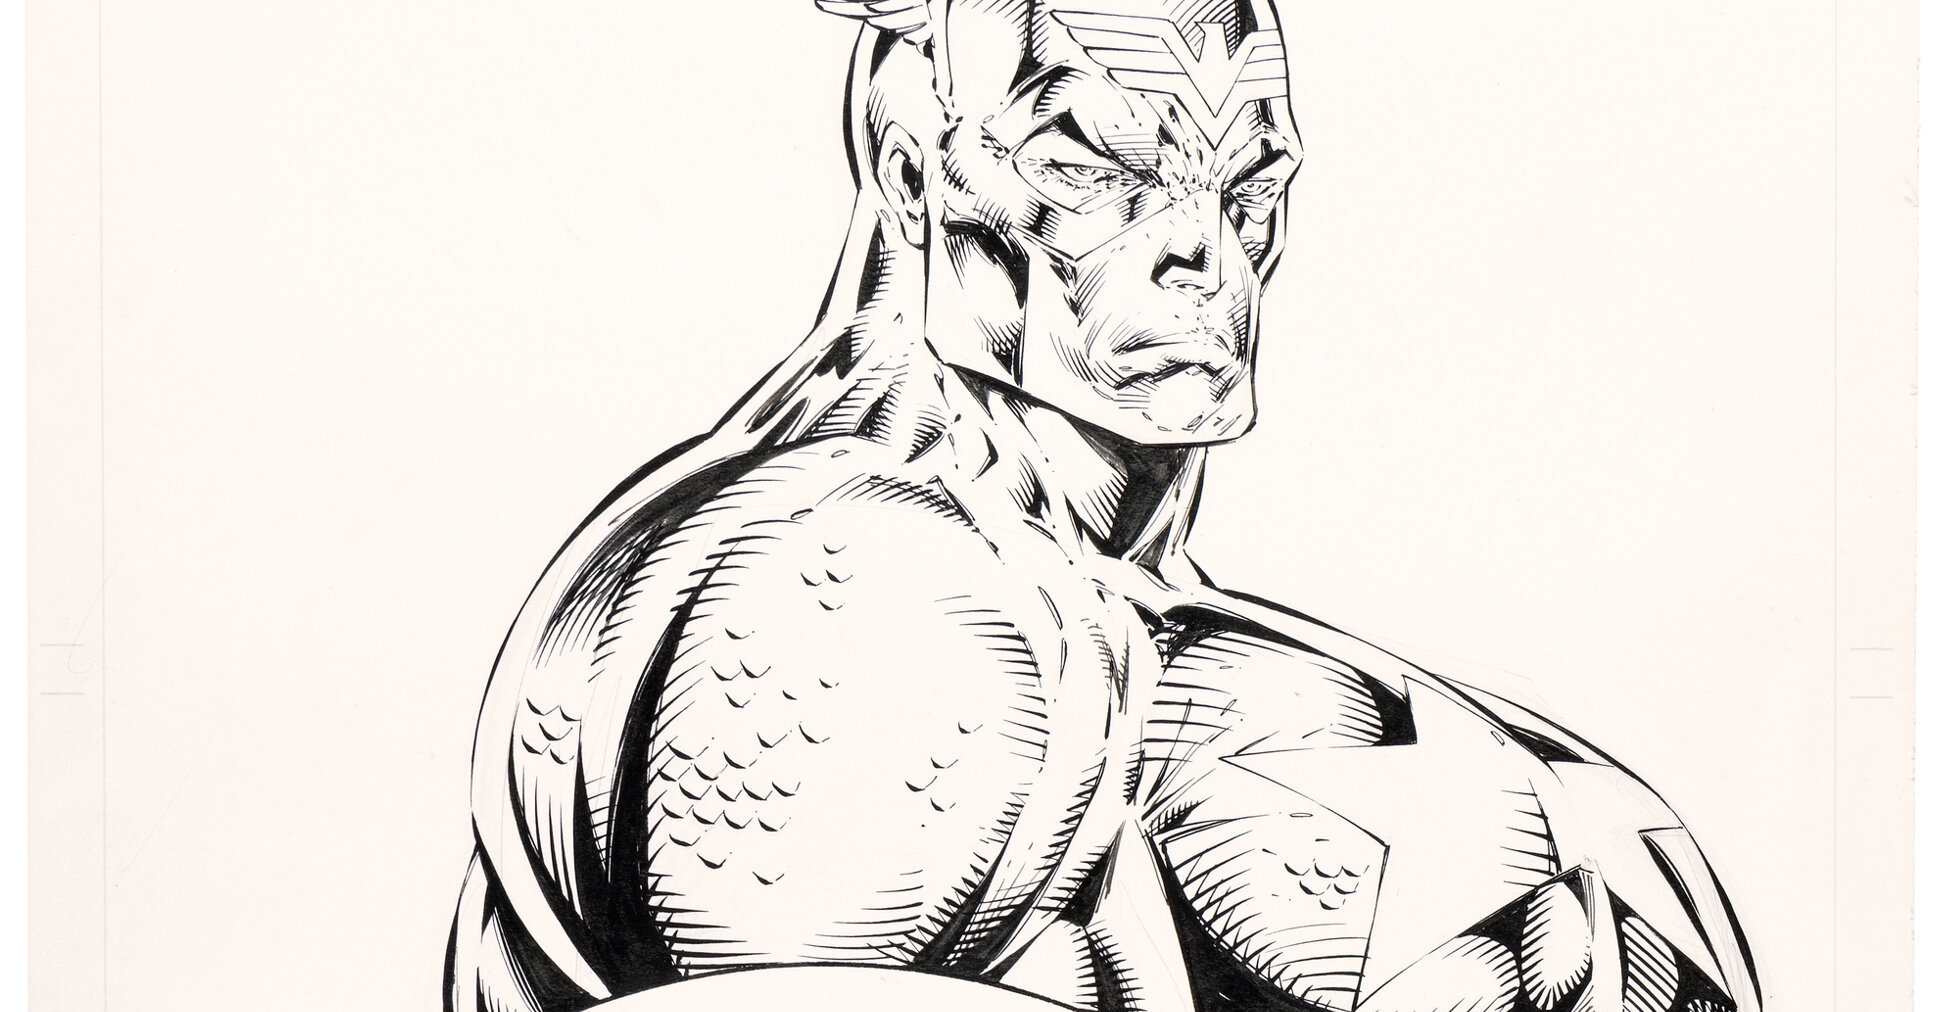 Rob Liefeld's Captain America 'Heroes Reborn' cover up for auction